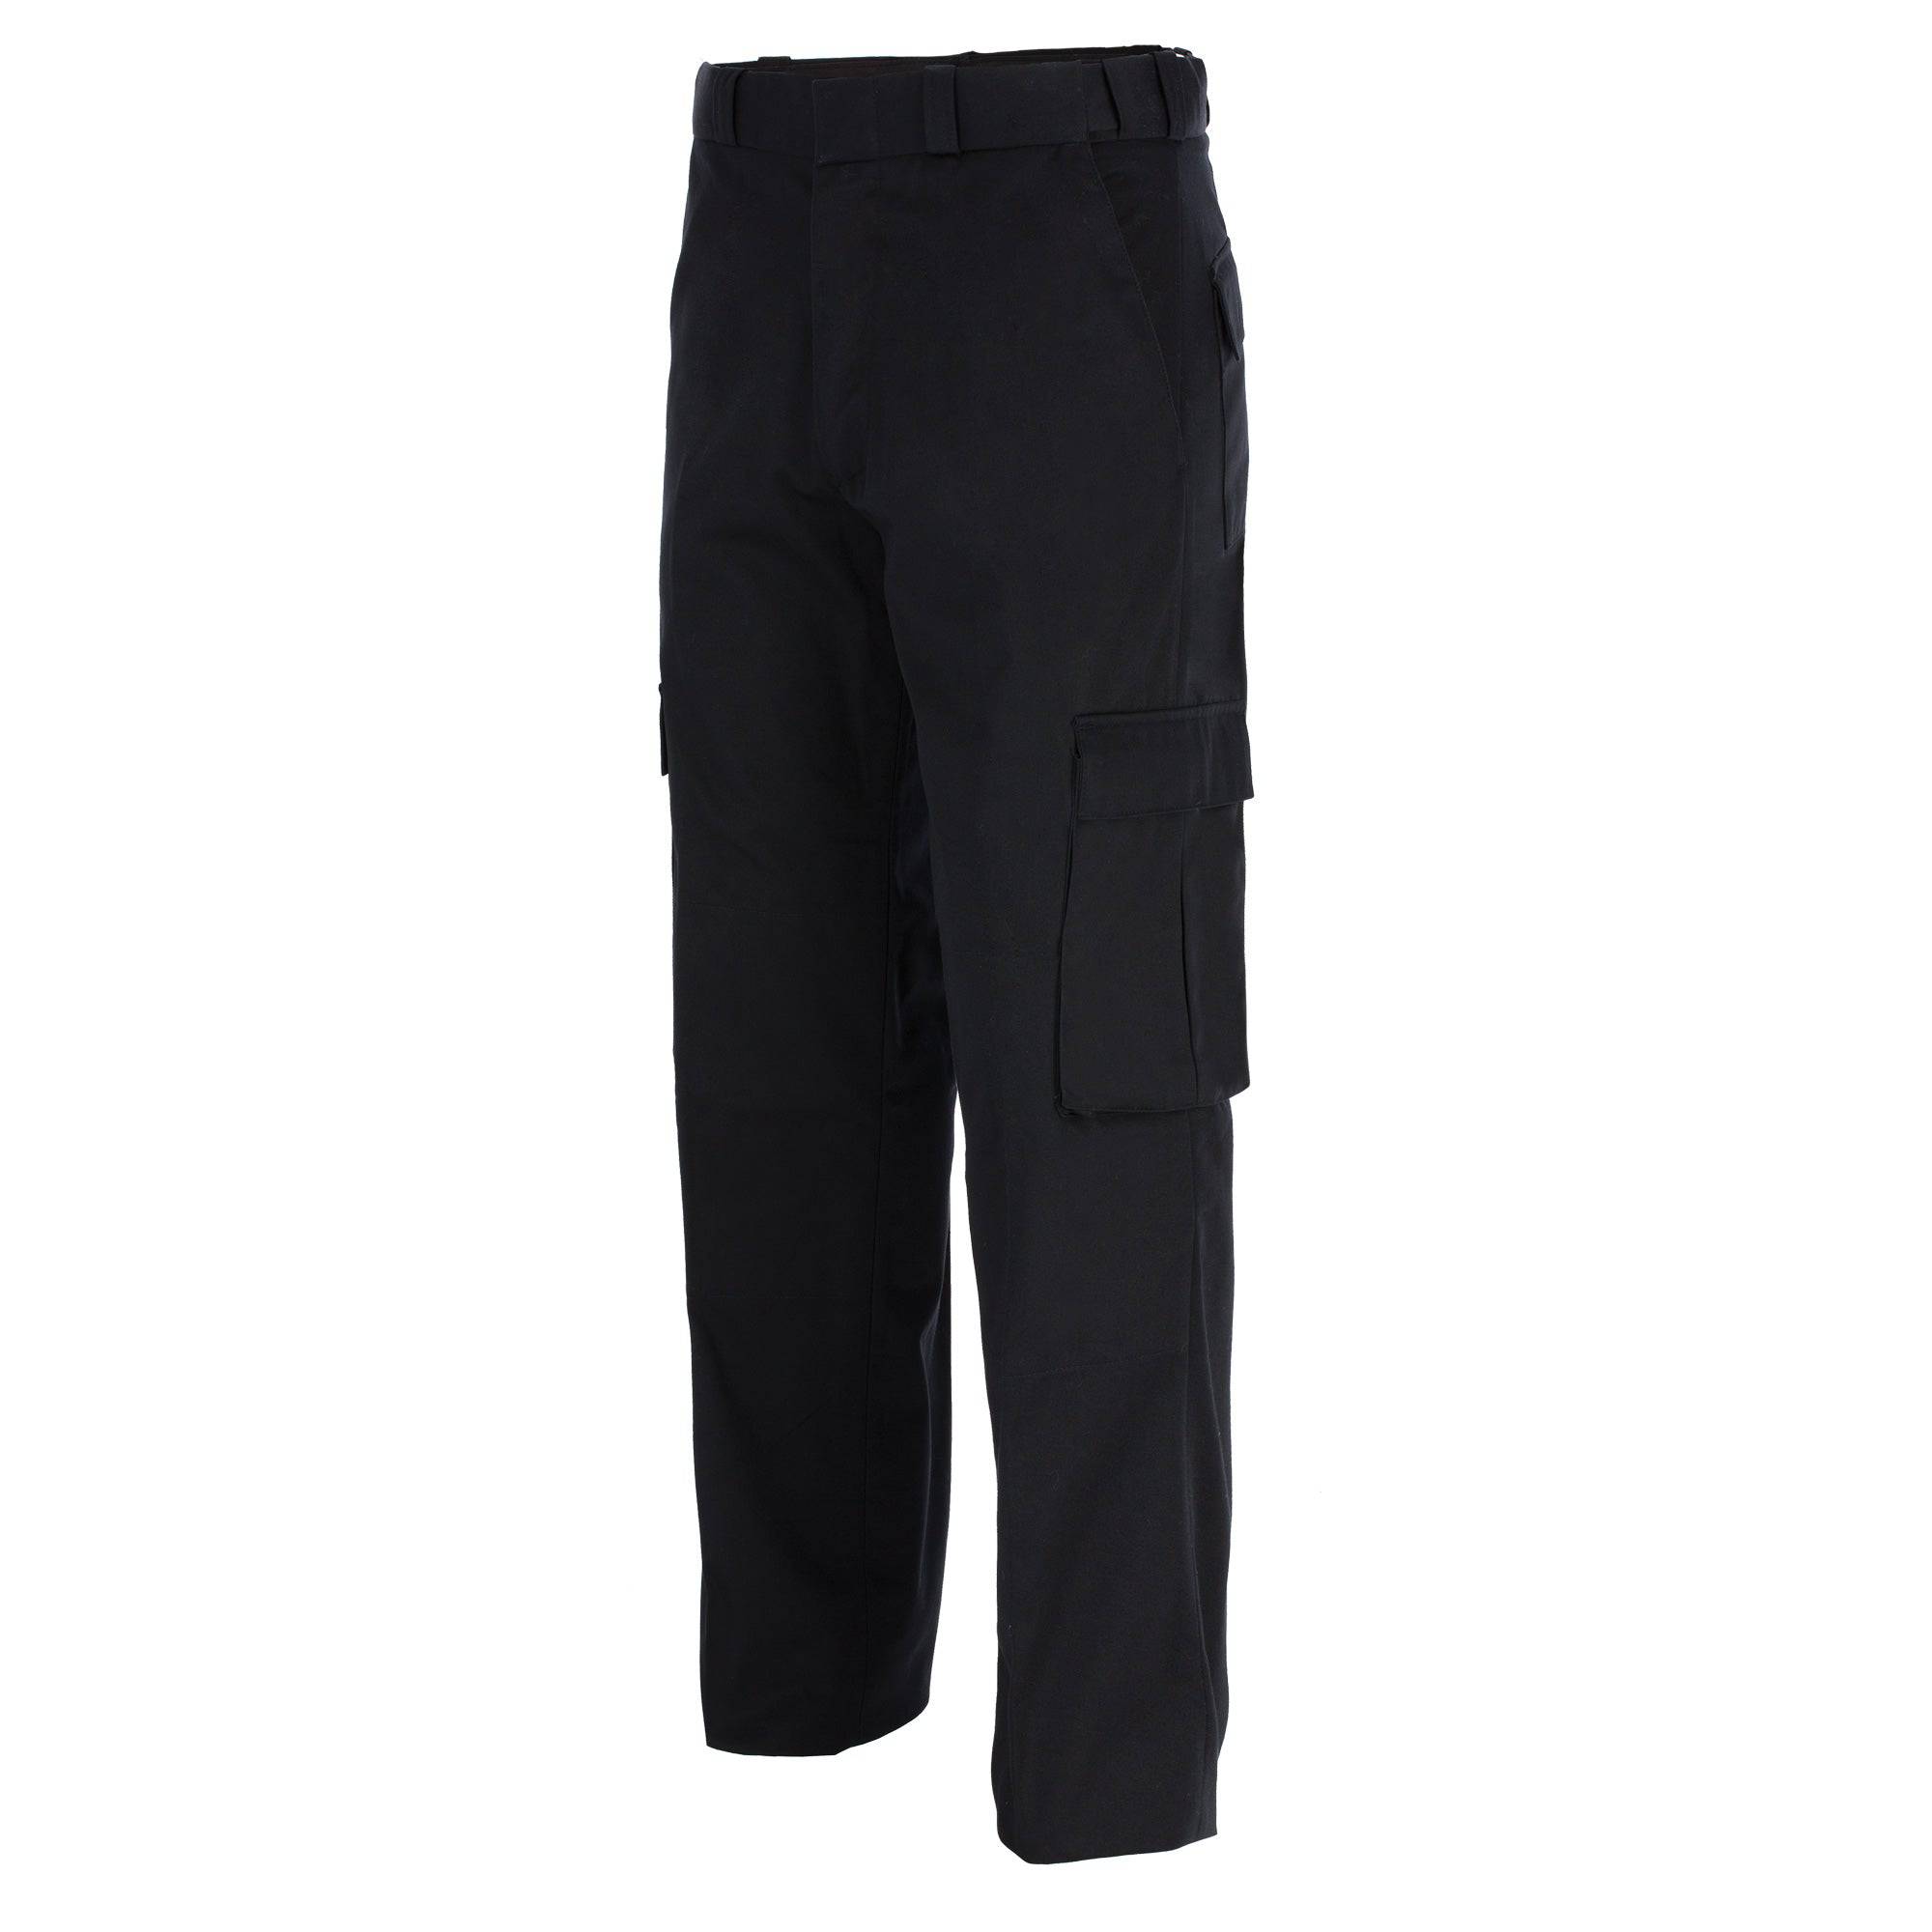 Tact Squad EMS/EMT Utility Trousers (7011) Women